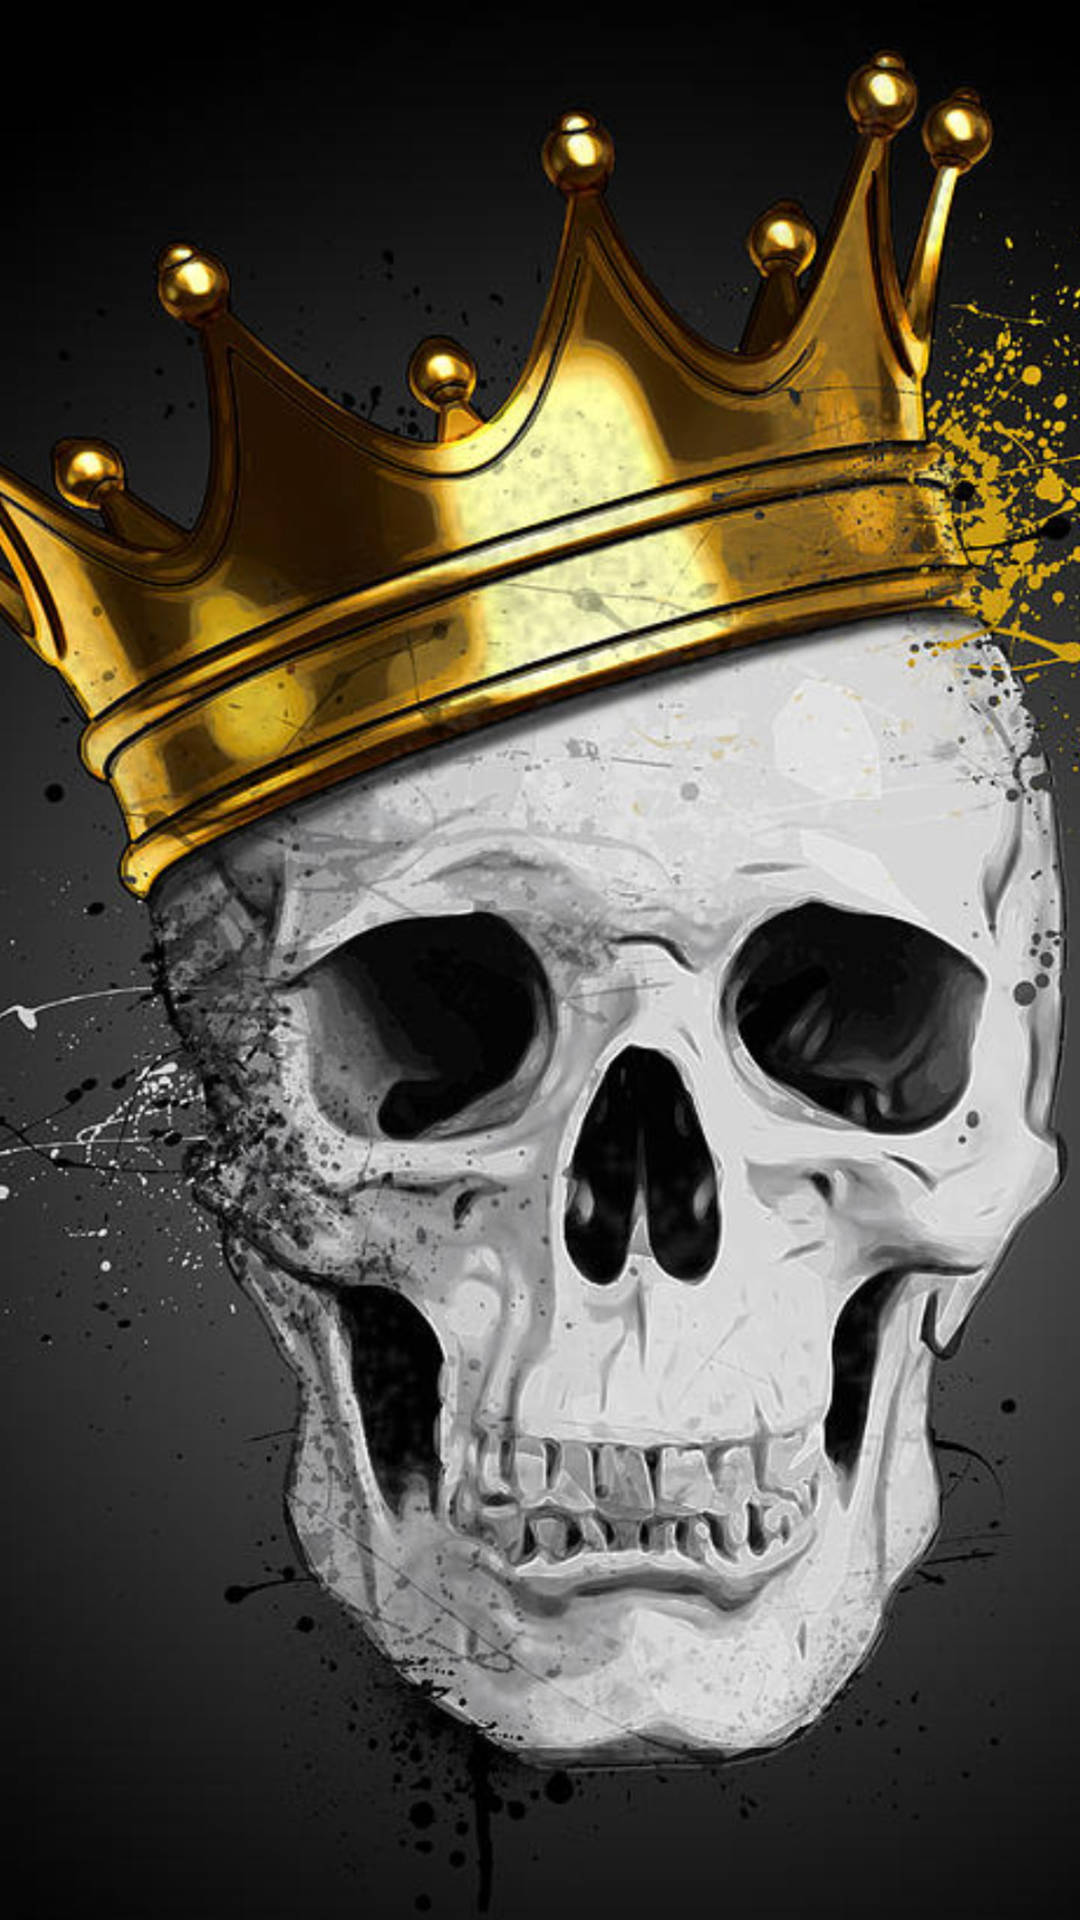 Gangster Skull With Gold Crown Wallpaper